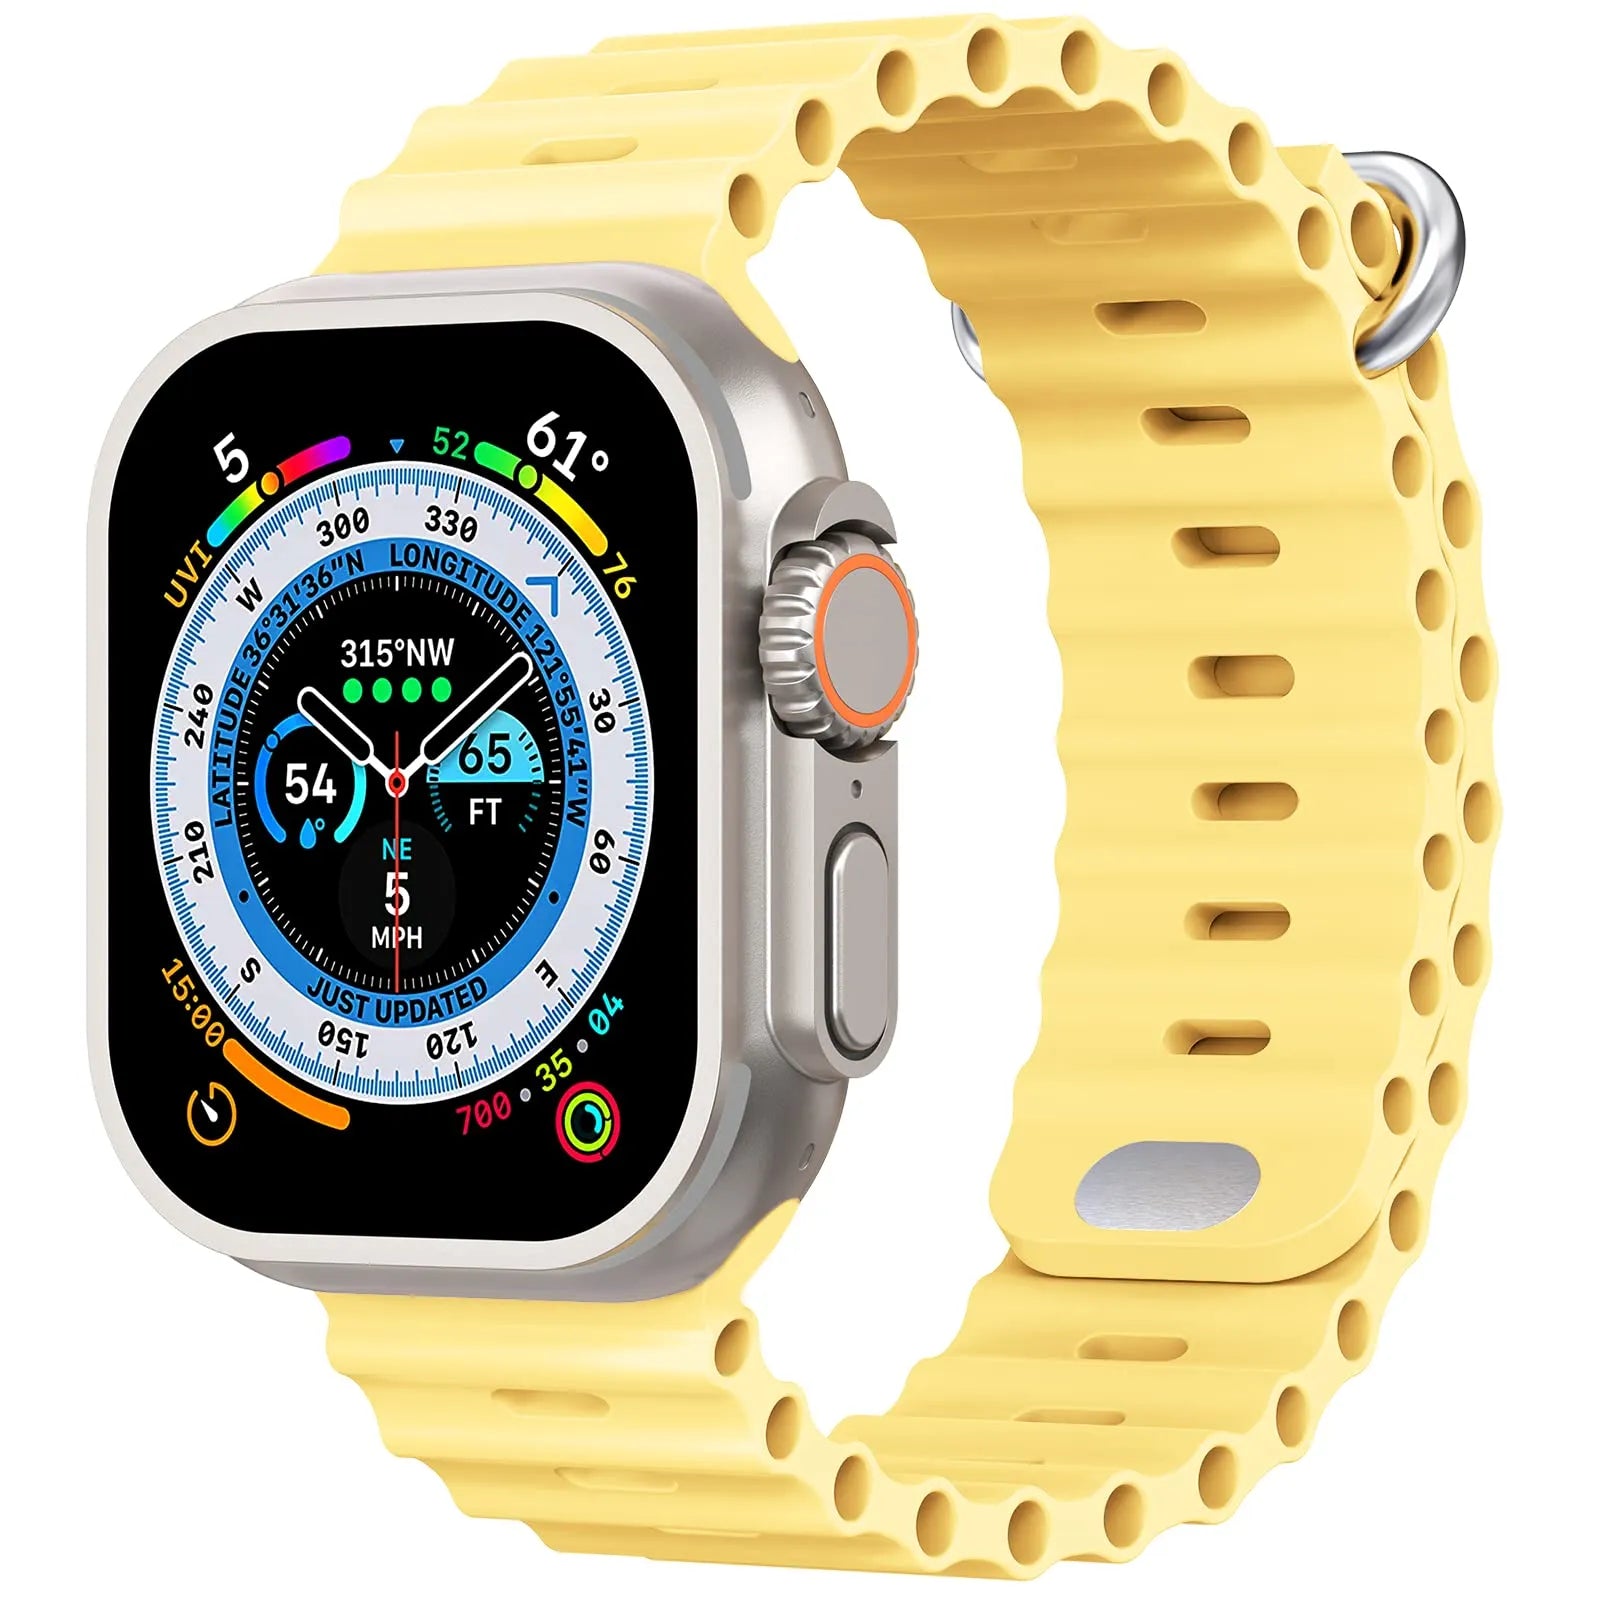 Apple Watch ocean band#color_ice yellow